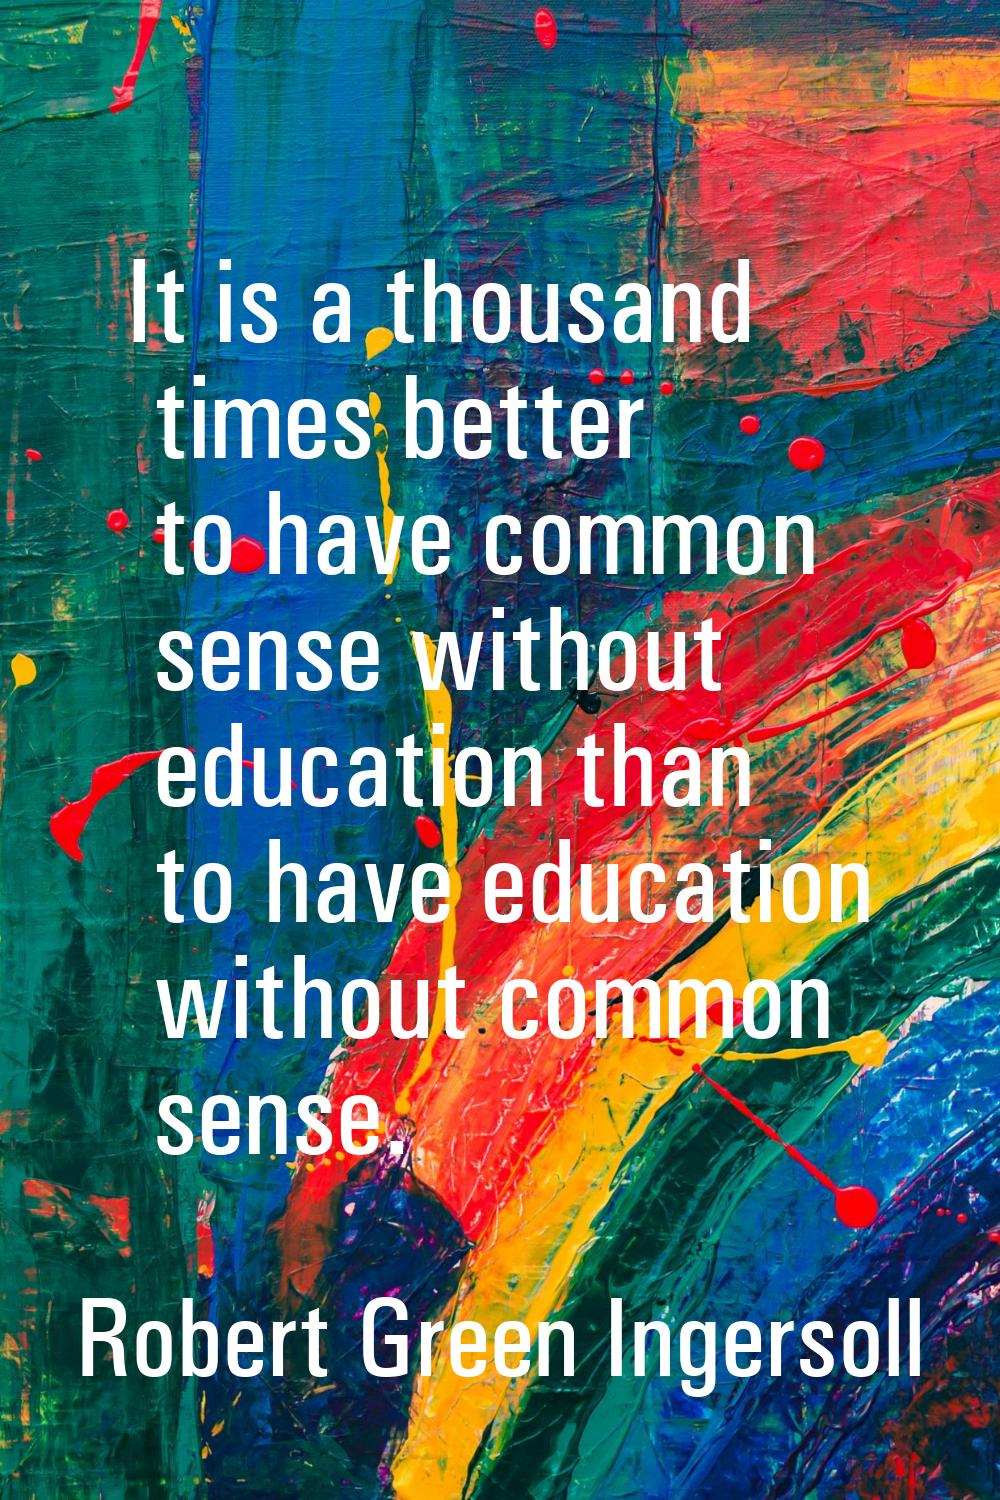 It is a thousand times better to have common sense without education than to have education without